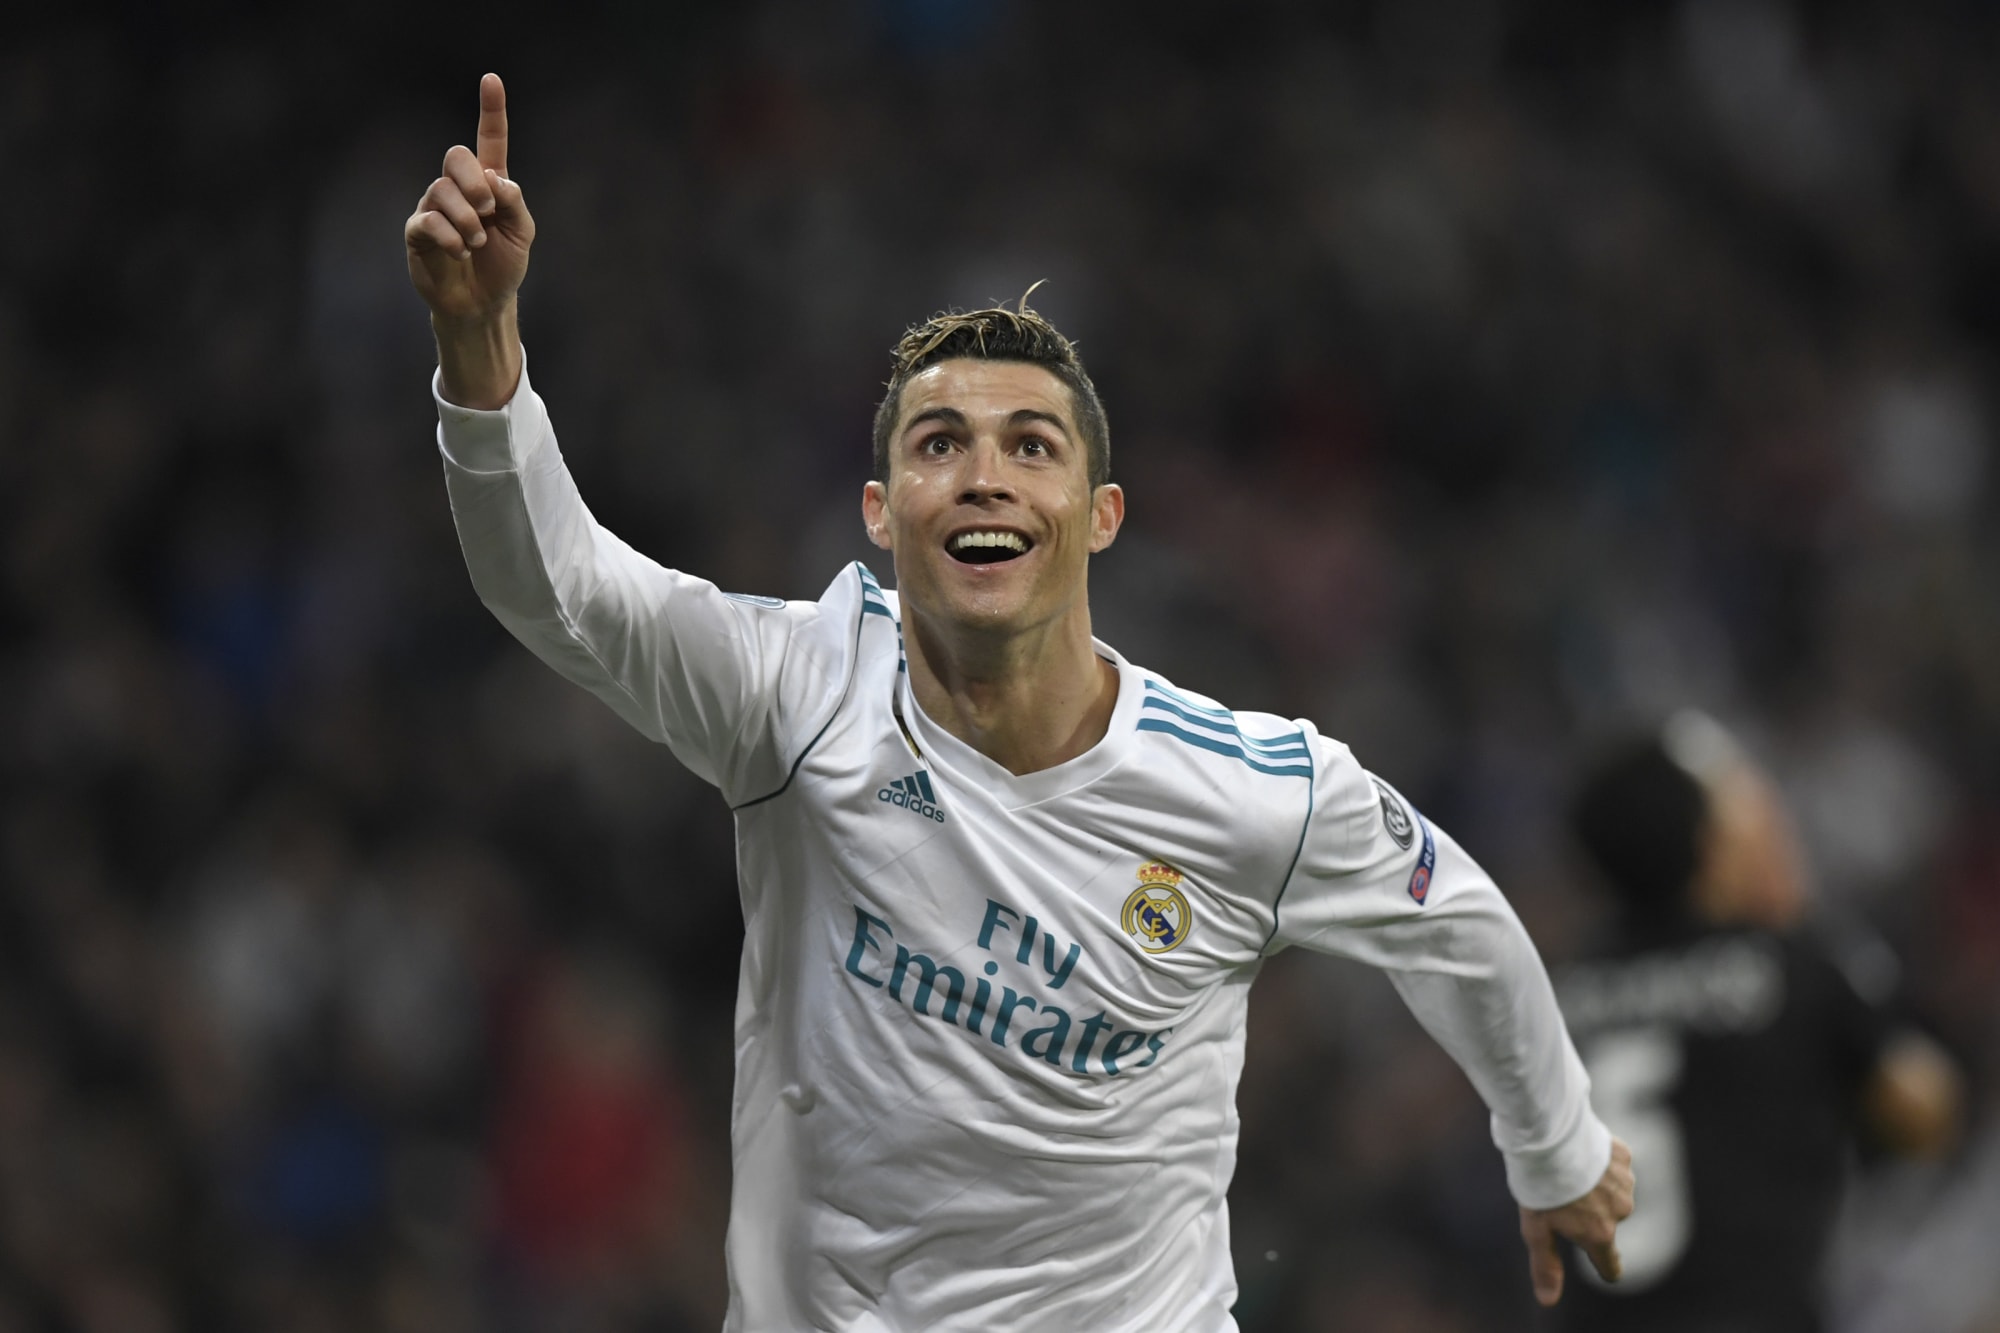 Real Madrid Ranking the 10 best Cristiano Ronaldo goals with the club